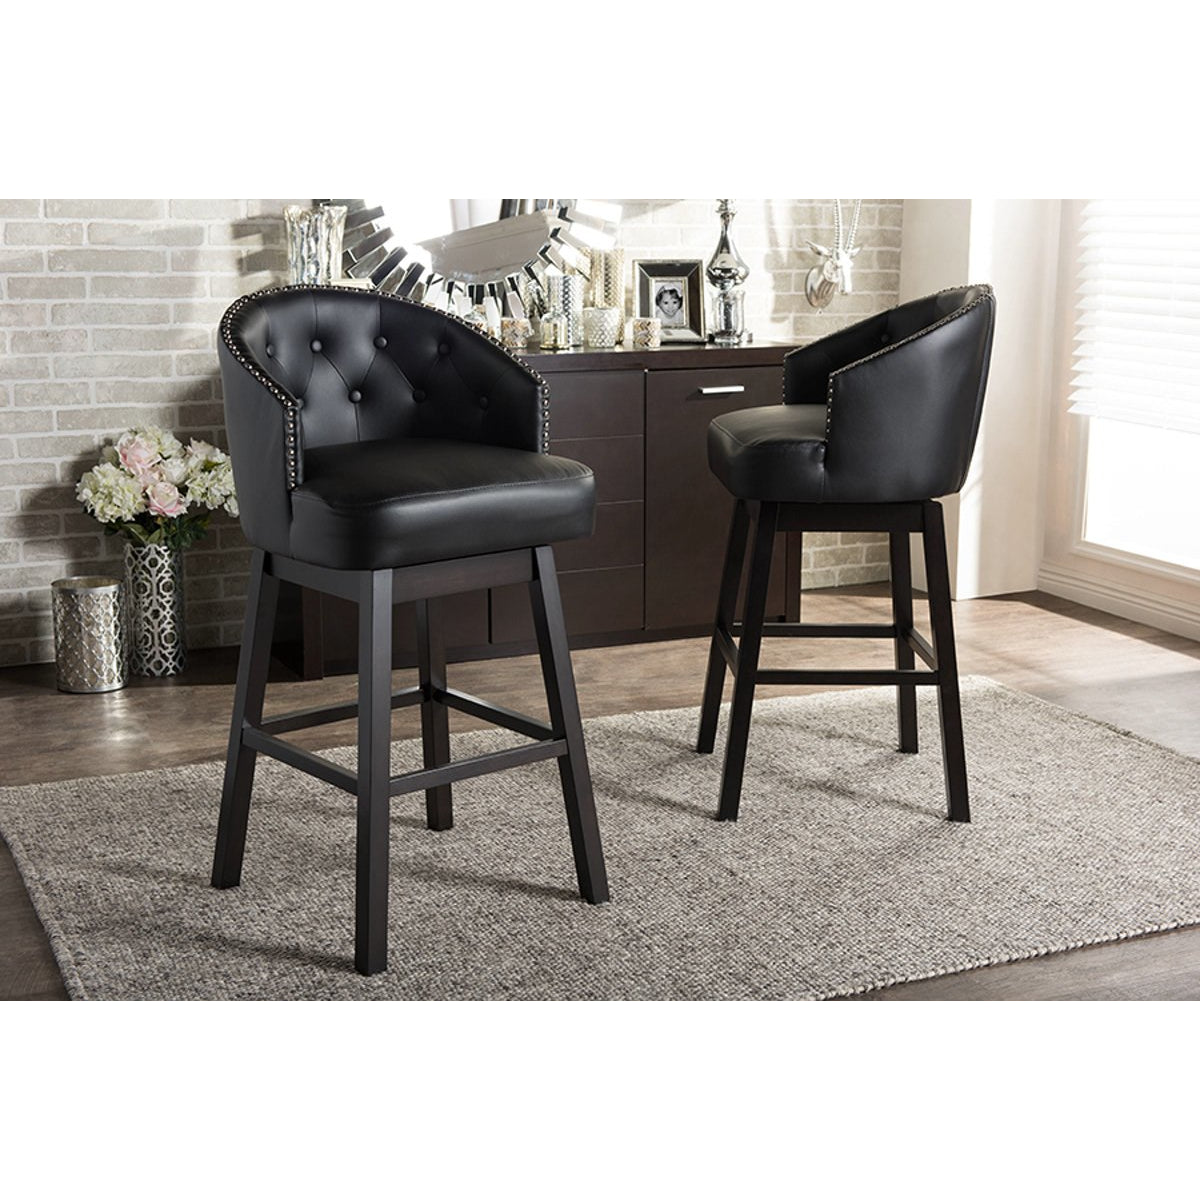 Baxton Studio Avril Modern and Contemporary Black Faux Leather Tufted Swivel Barstool with Nail heads Trim (Set of 2) Baxton Studio-Bar Stools-Minimal And Modern - 4